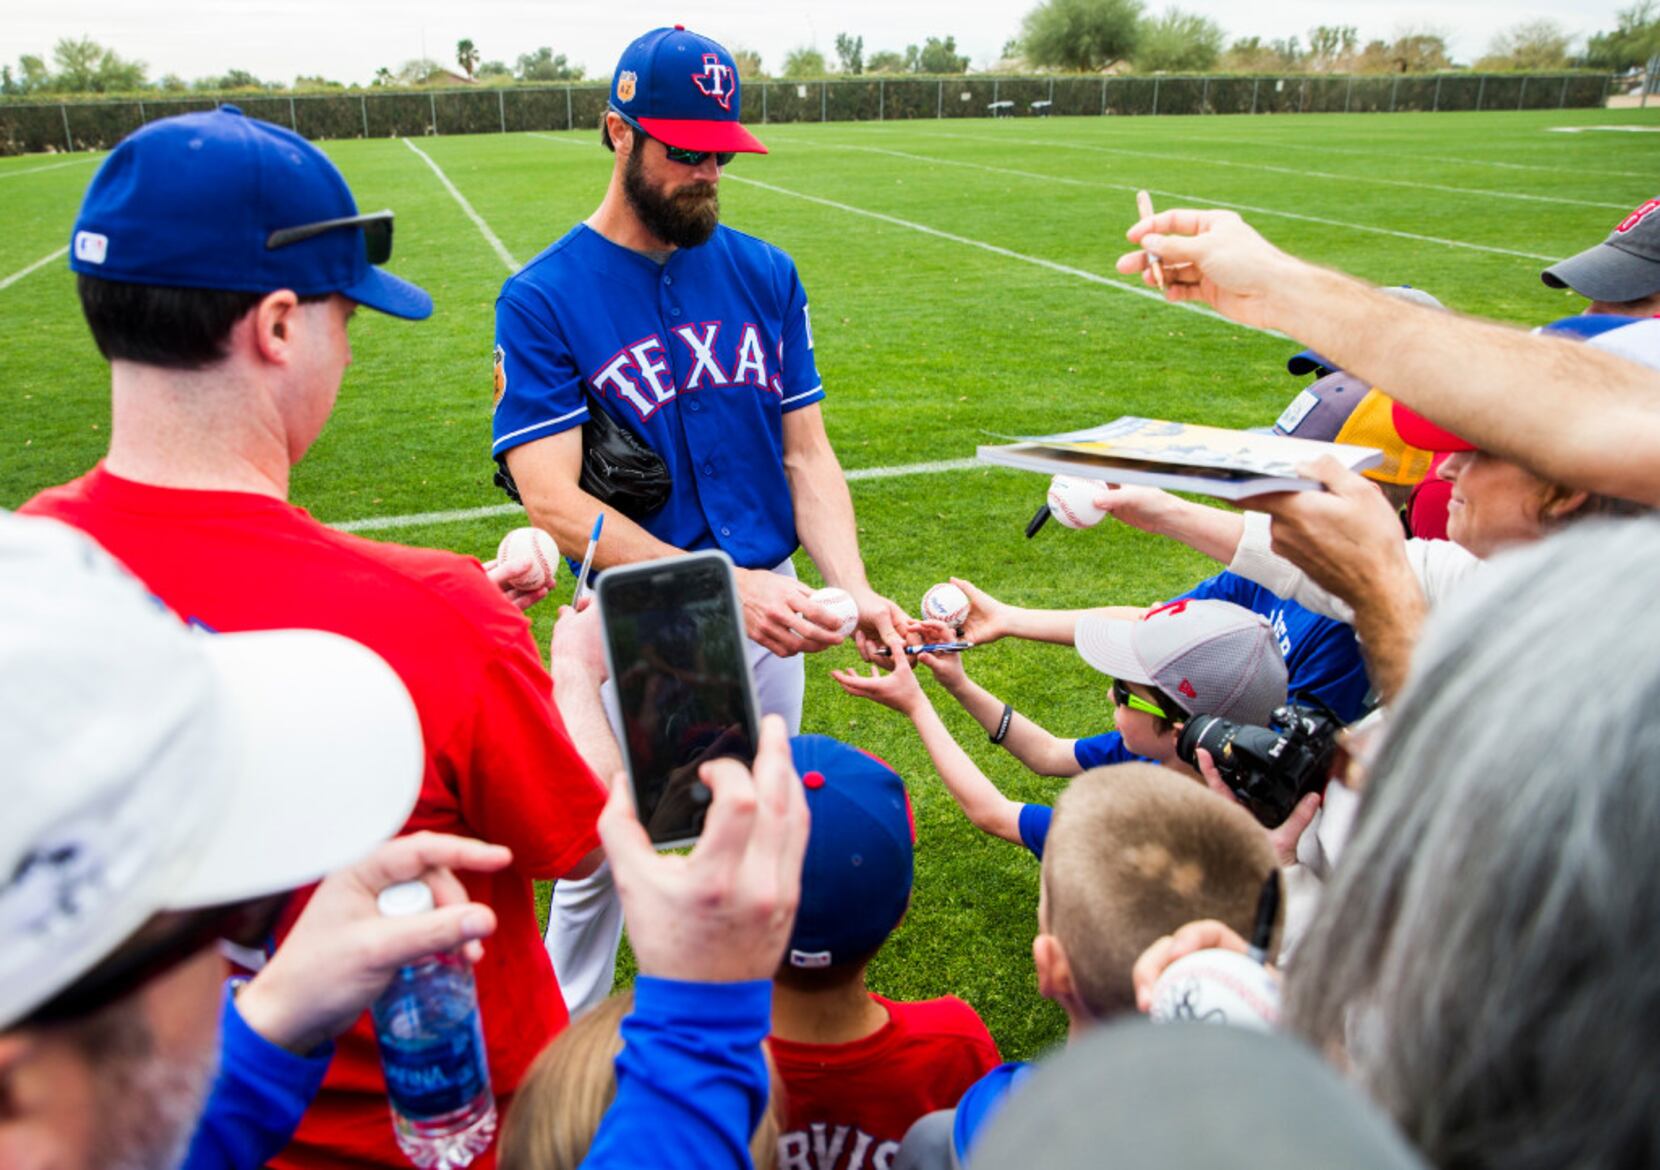 Cole Hamels' Kids: Learn About His Family Life Here